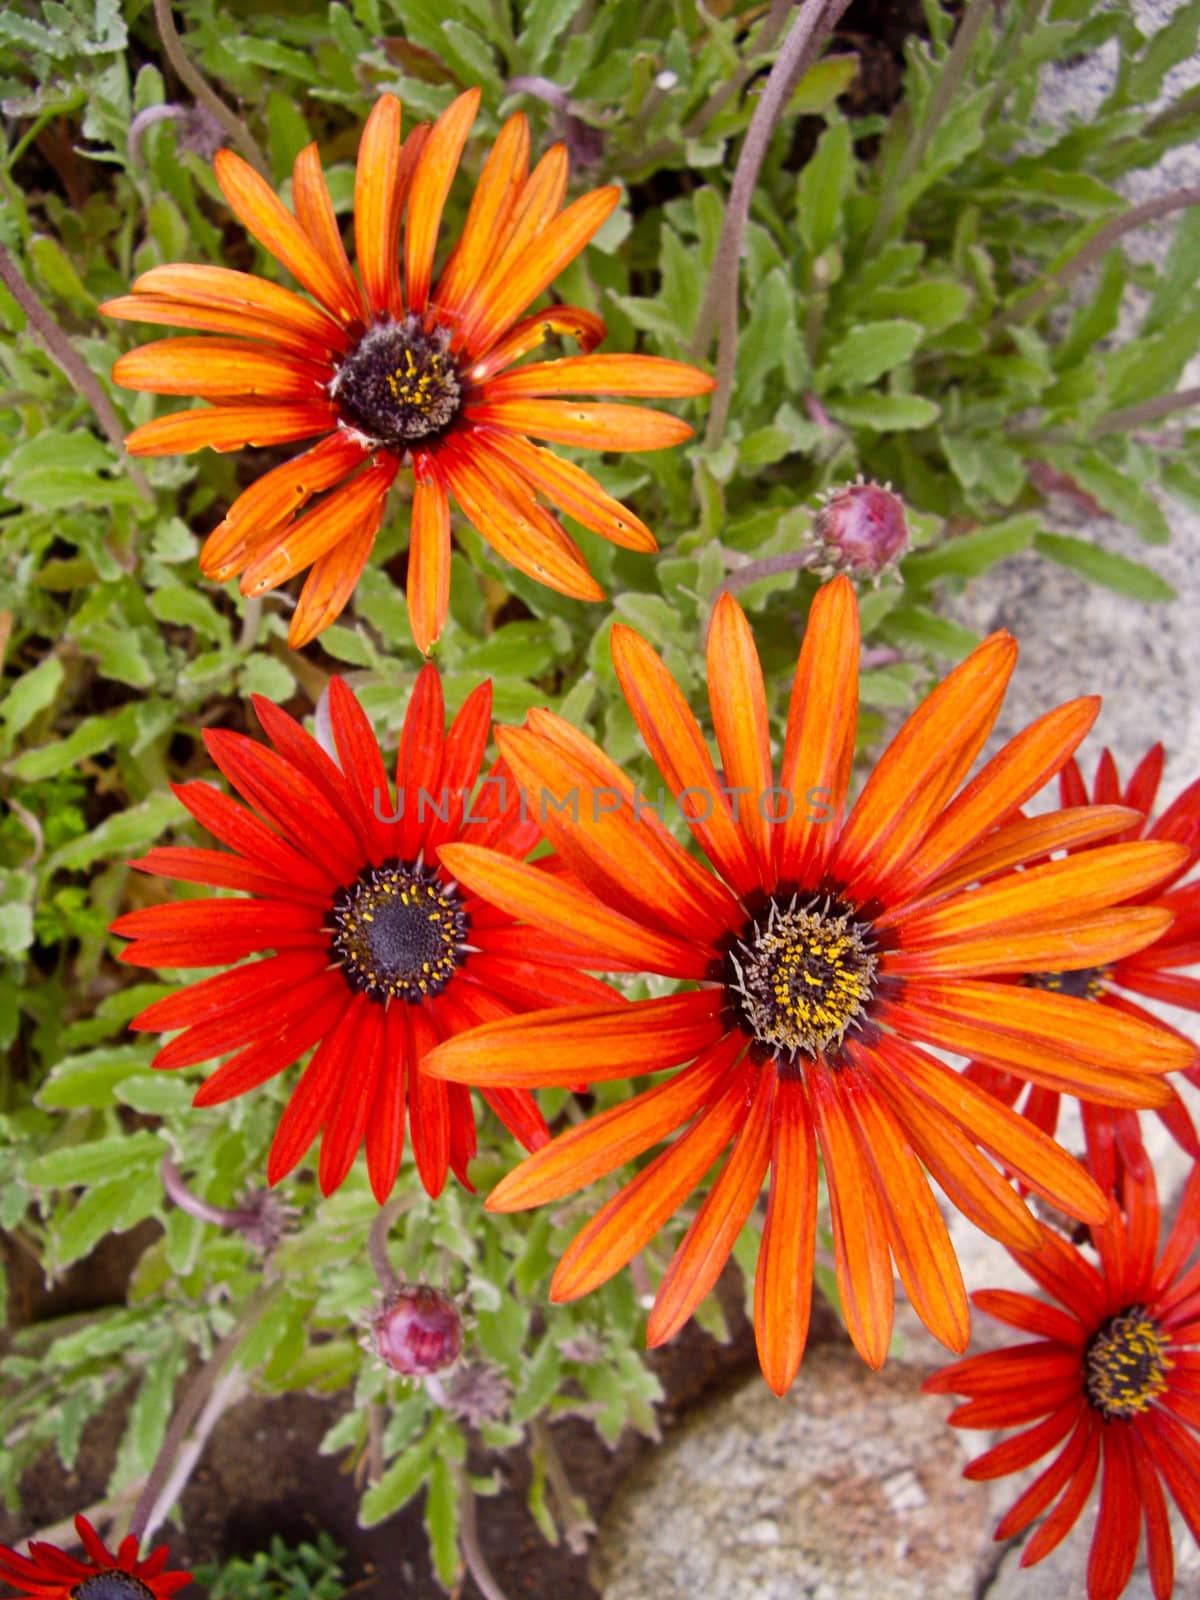 Orange and red daisies in a country garden